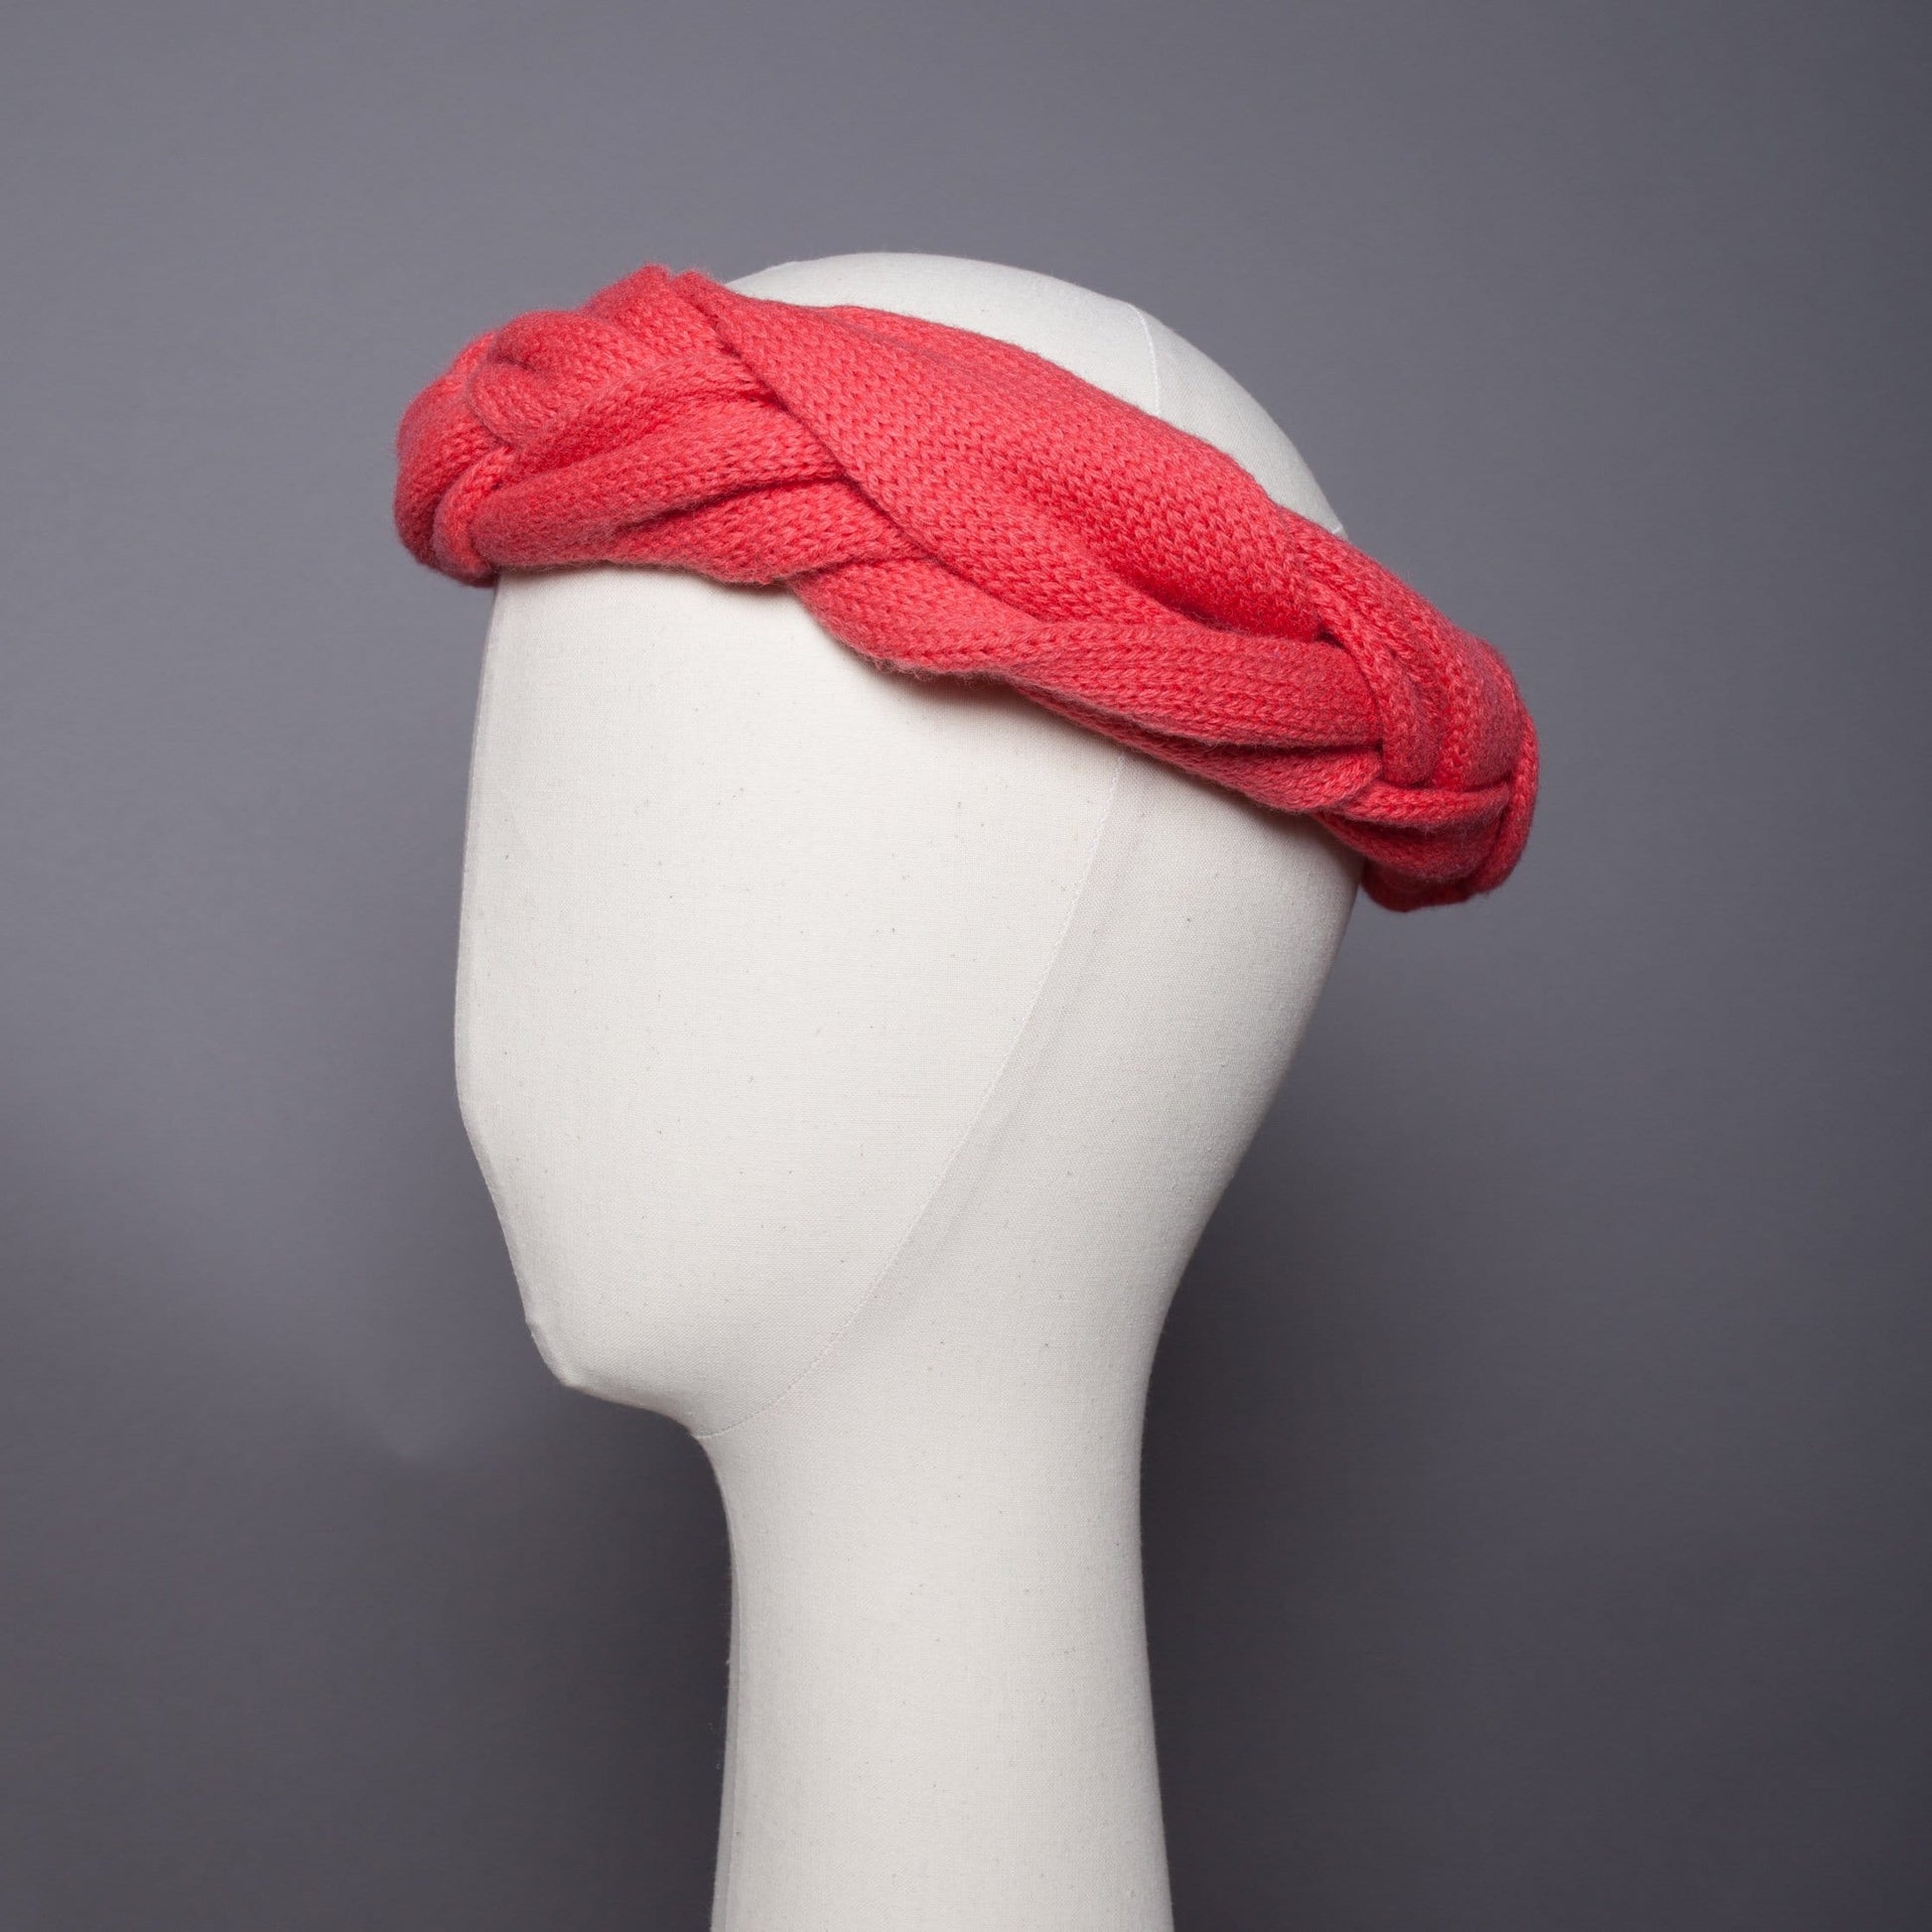 Headband tressé Evesome maille mousseuse 100% cachemire - Braided headband Evesome 100% cashmere frothy mesh